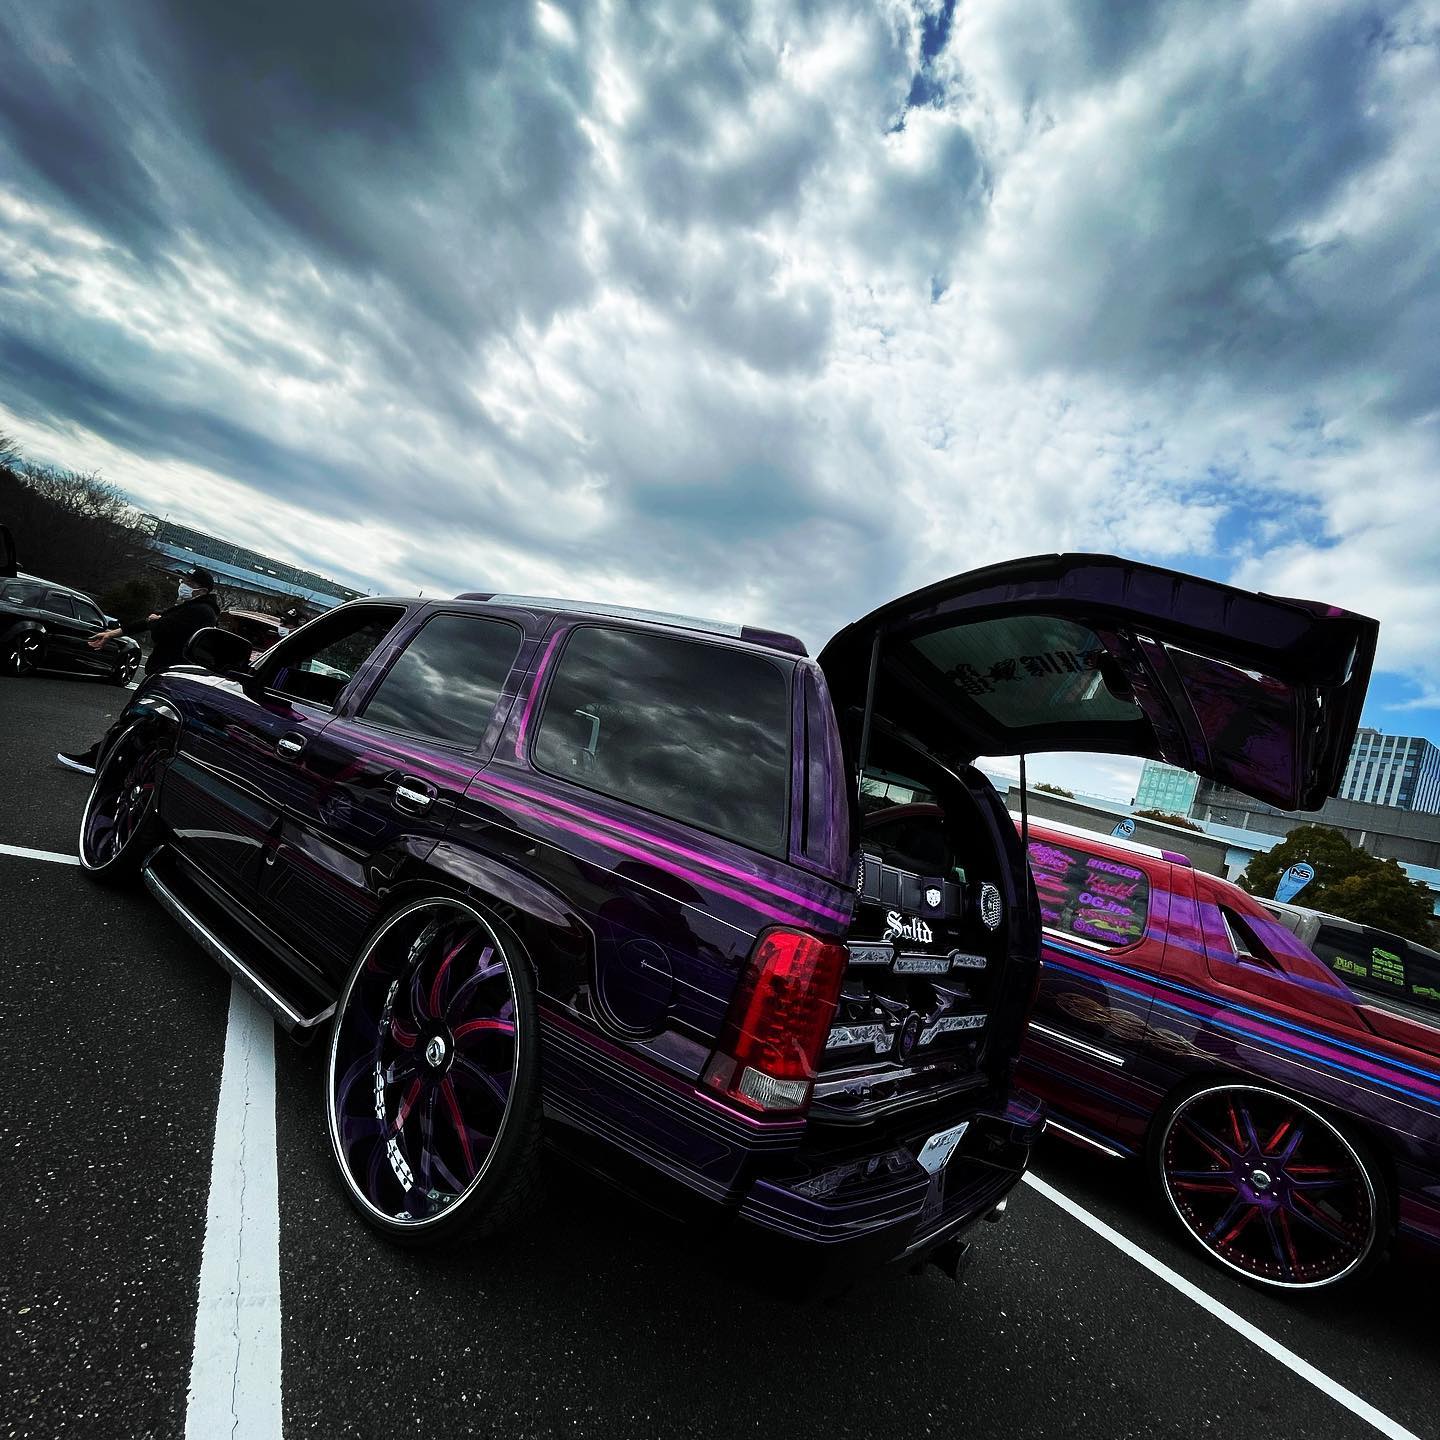 #nsroundercarshow #solidcarclub #solidcc #escalade #dmc #custompaint #fbscustomtape